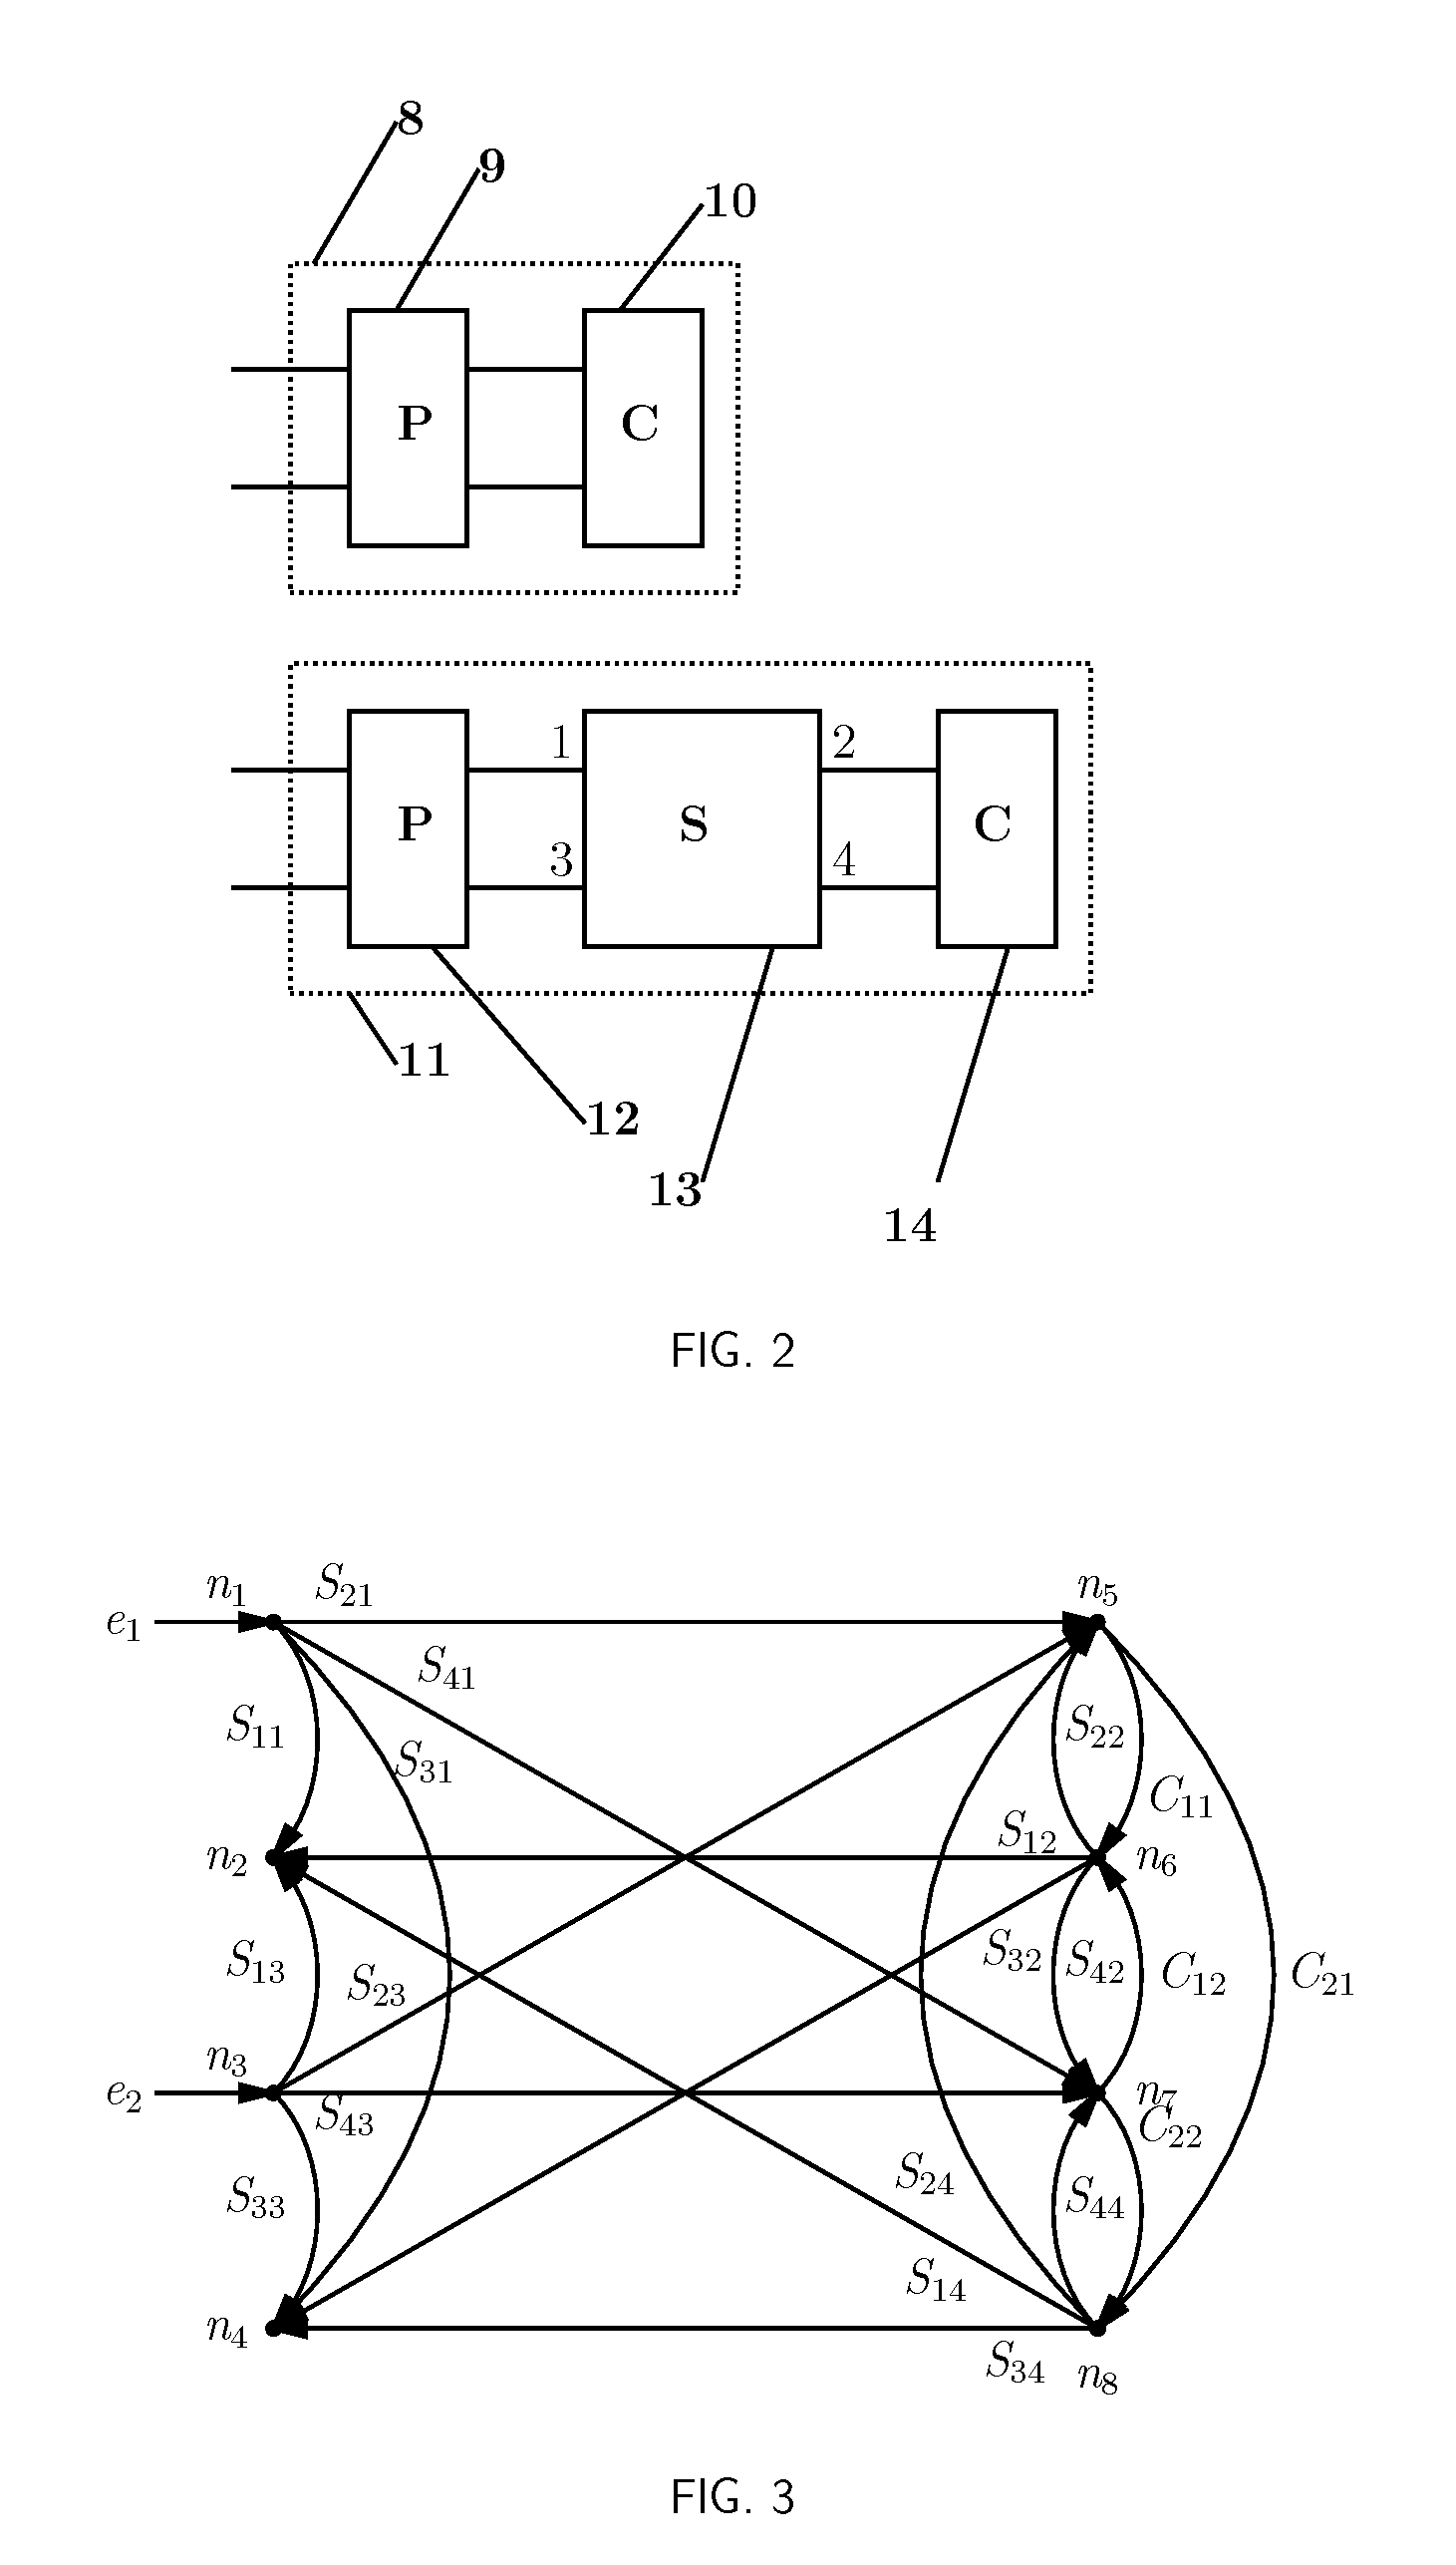 Method for printed circuit board trace characterization